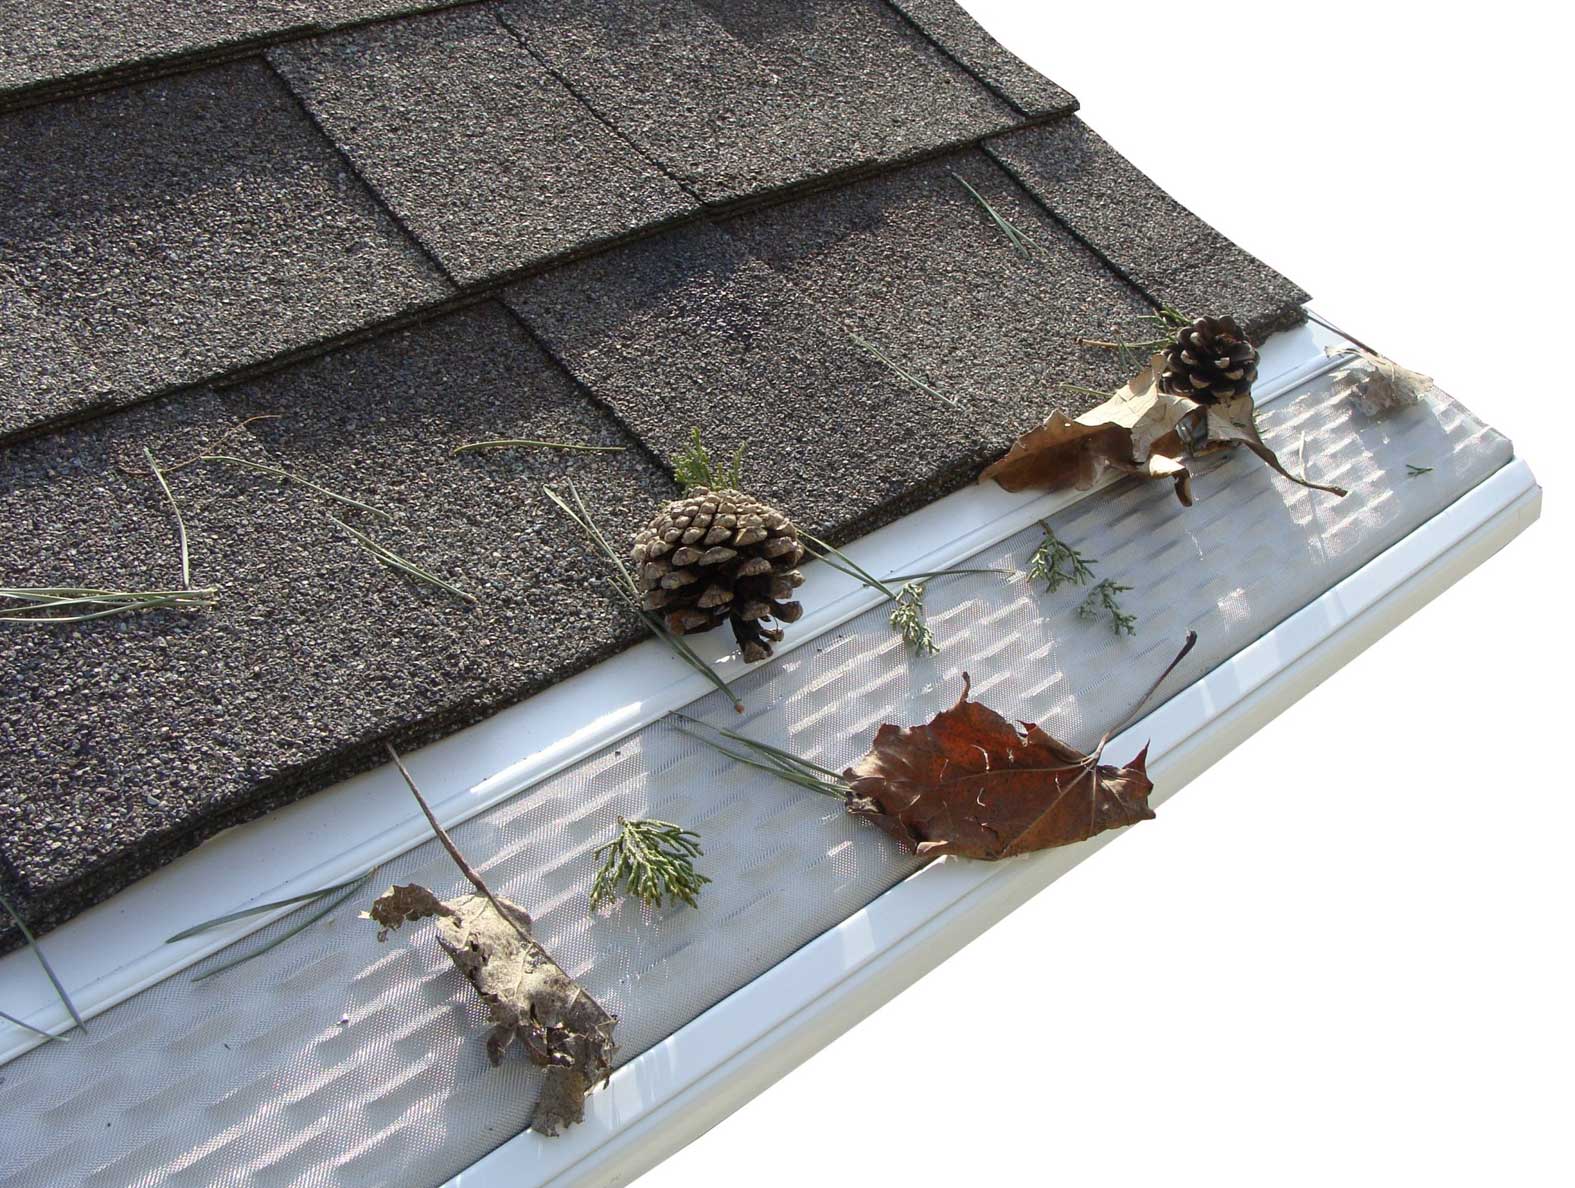 gutter guards can protect your gutters and roof from ice dams